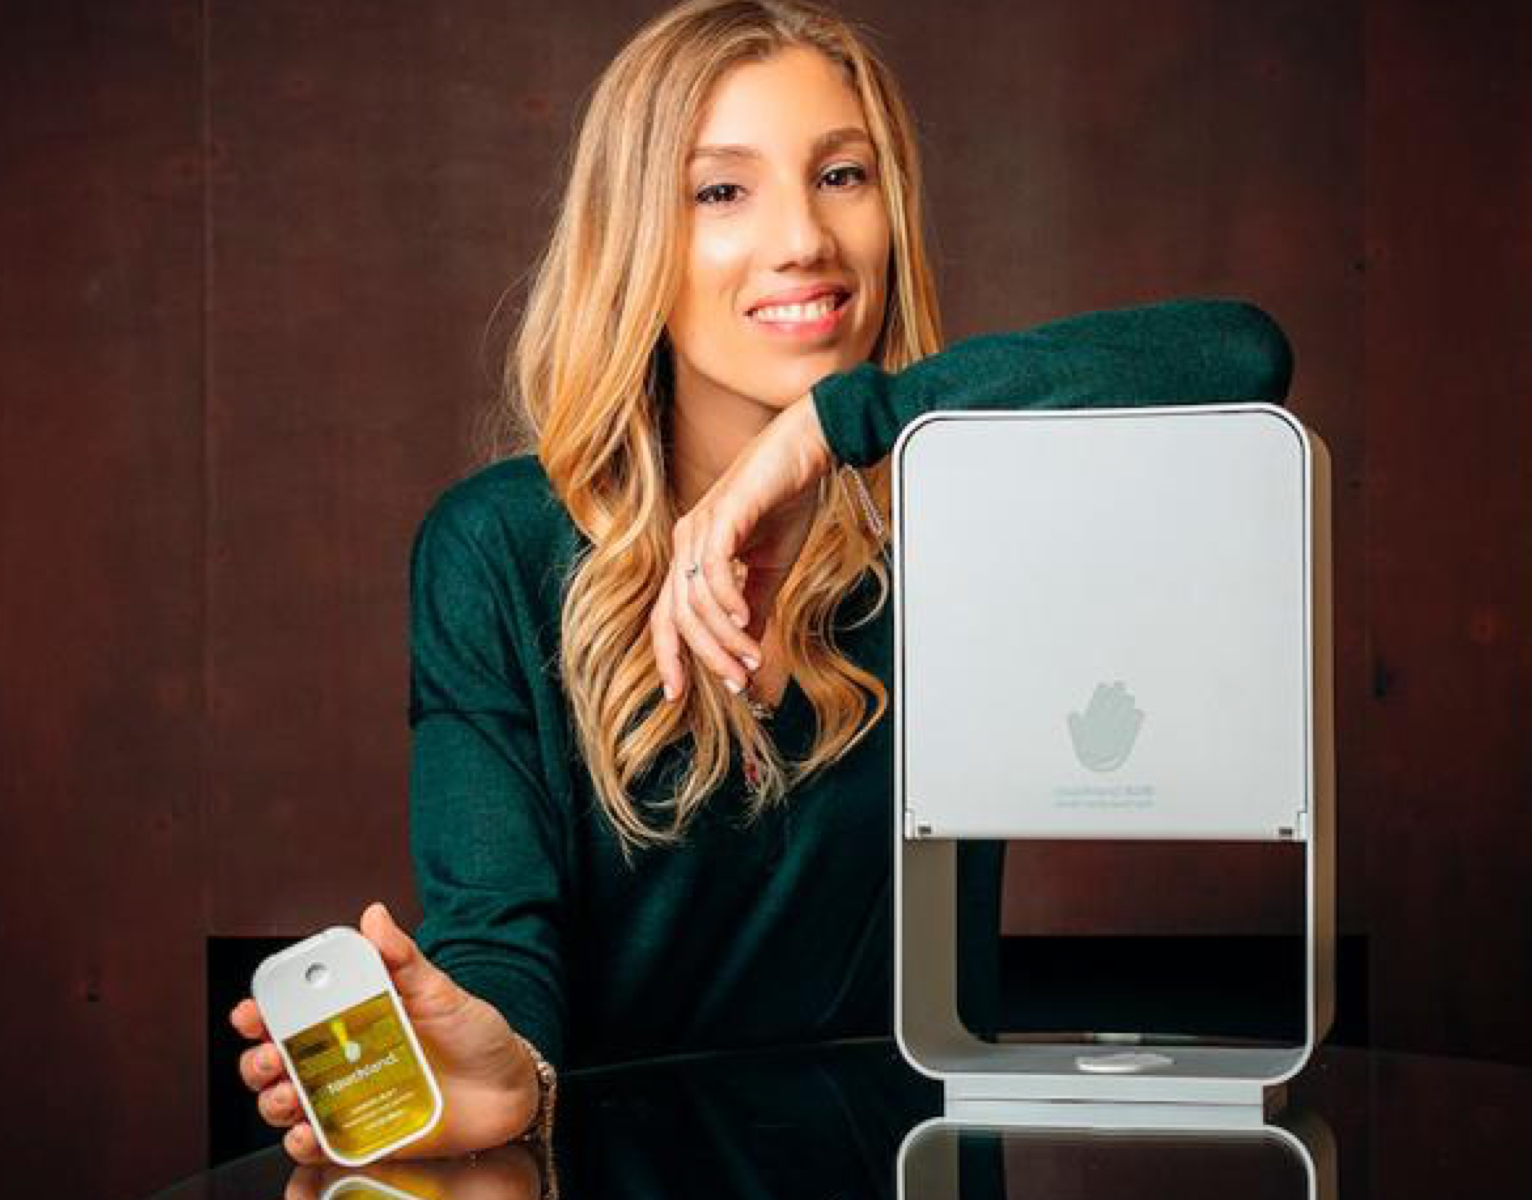 This Female Entrepreneur Is Disrupting The Entire Hand Sanitizer Industry (Forbes)